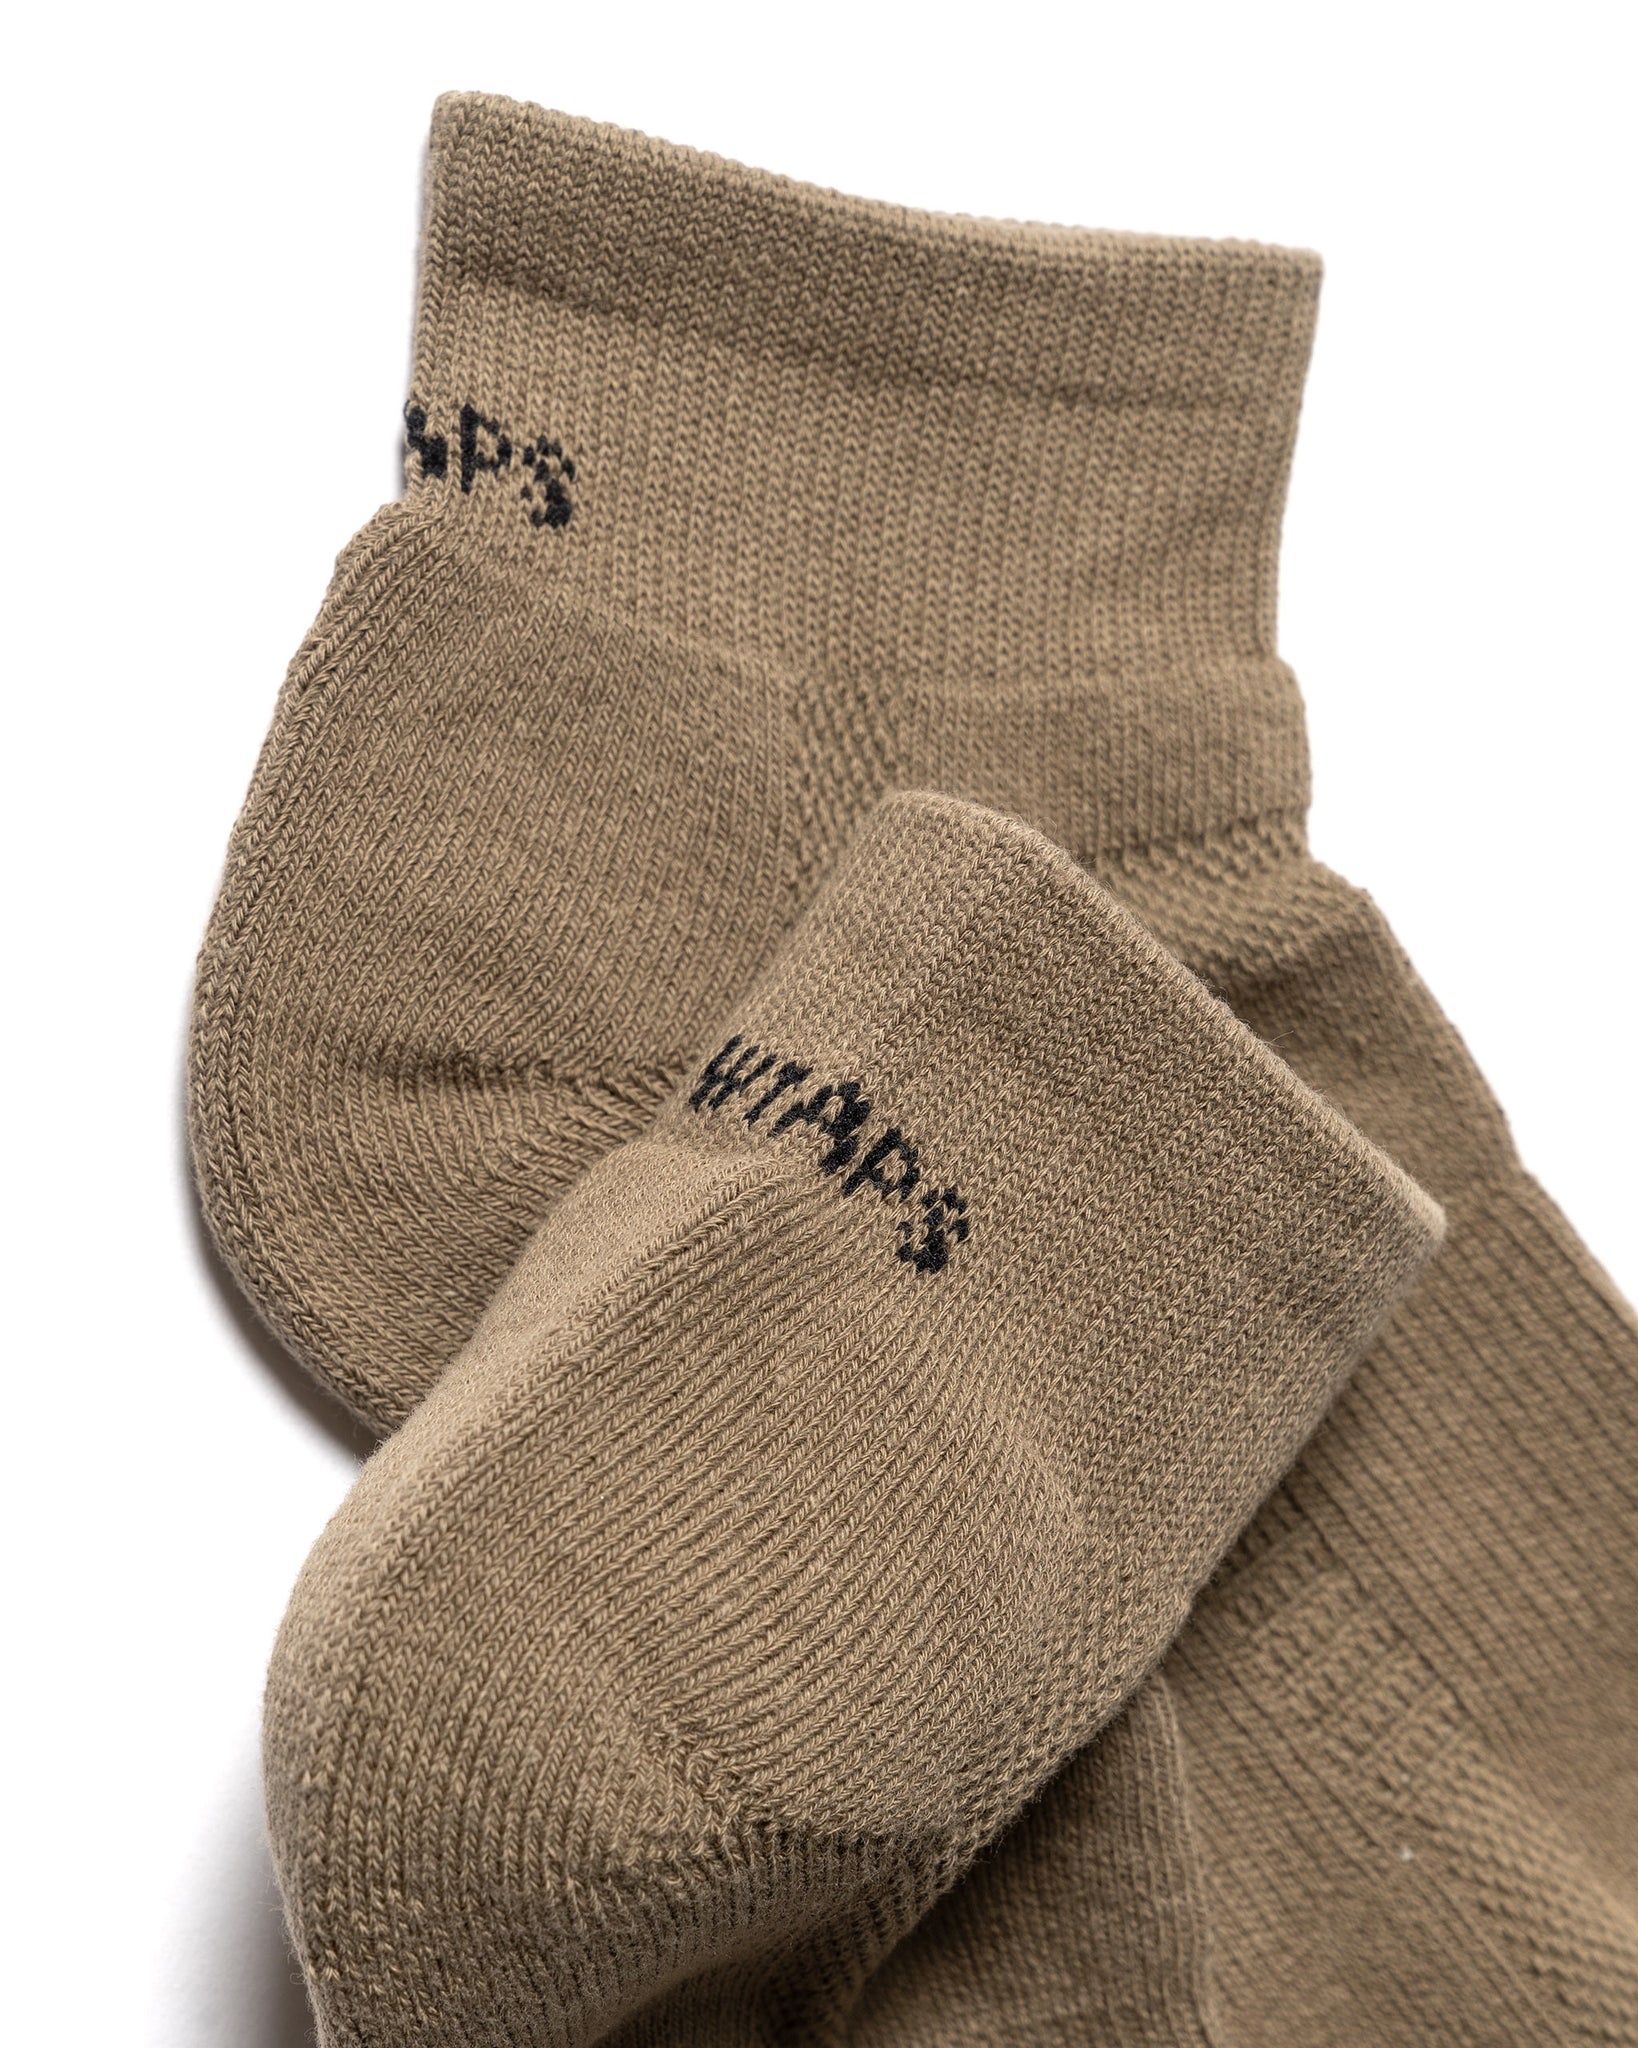 Skivvies 3 Piece Ankle Sox Olive Drab - 2